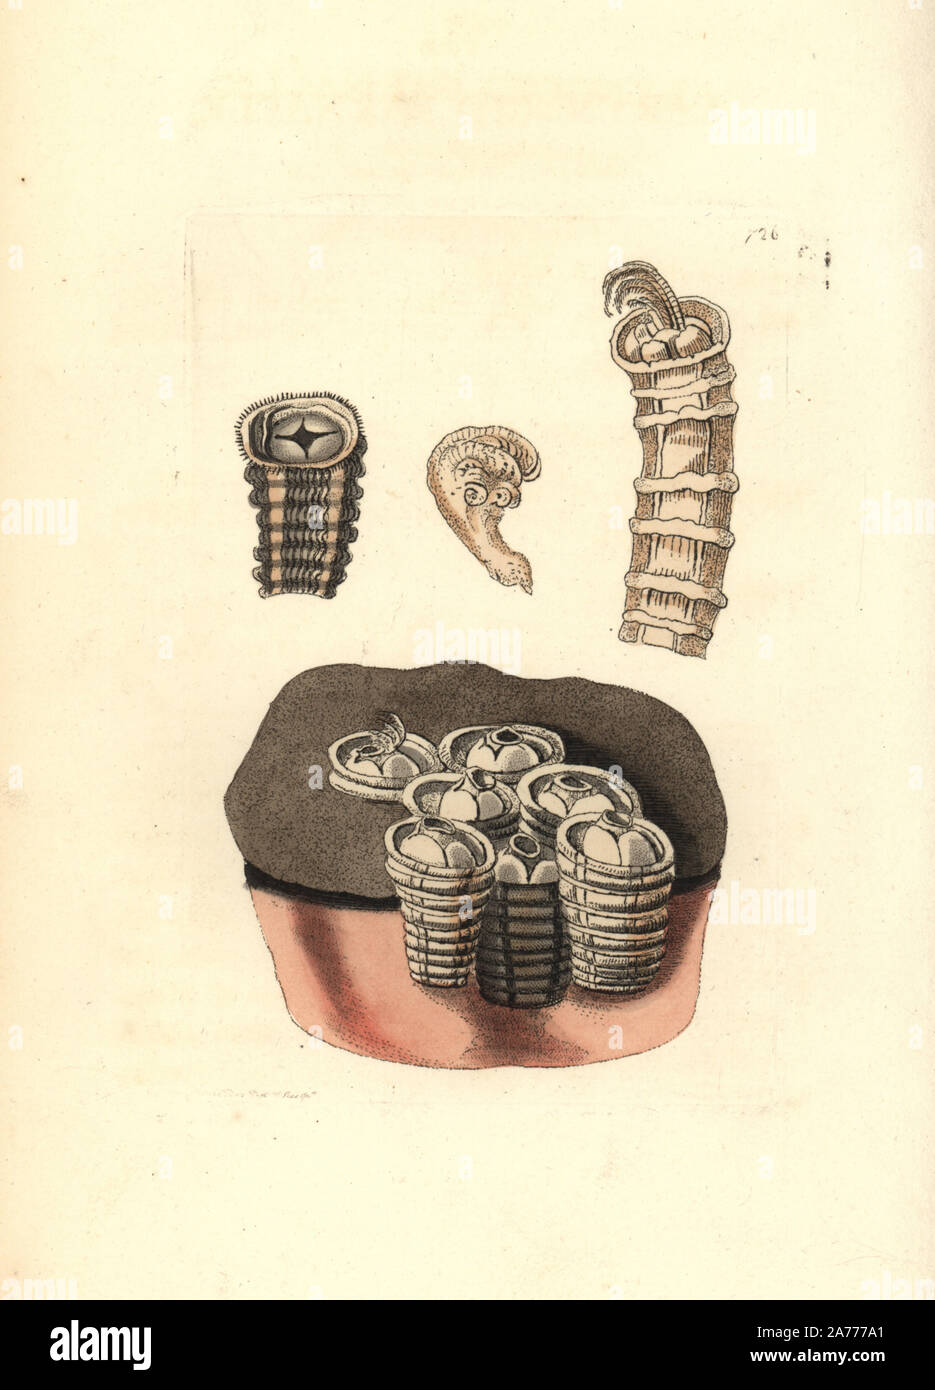 Coronulid barnacles, Tubicinella major. Illustration drawn and engraved by Richard Polydore Nodder. Handcoloured copperplate engraving from George Shaw and Frederick Nodder's 'The Naturalist's Miscellany,' London, 1805. Stock Photo